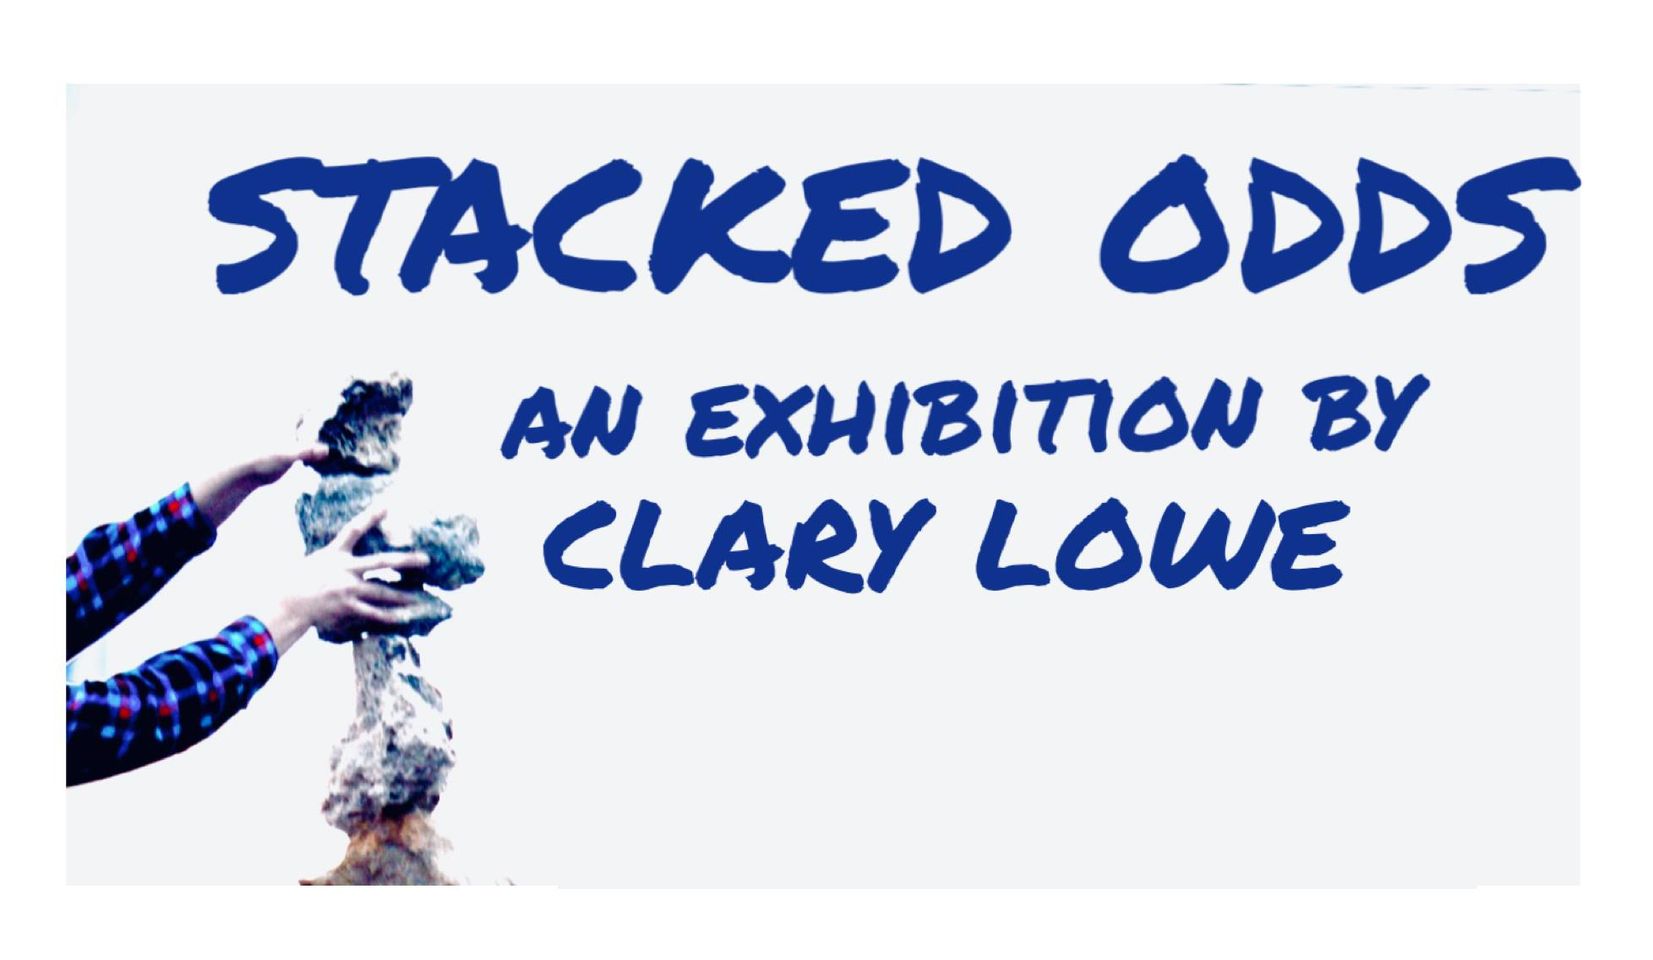 Stacked Odds, Exhibition by Clary Lowe